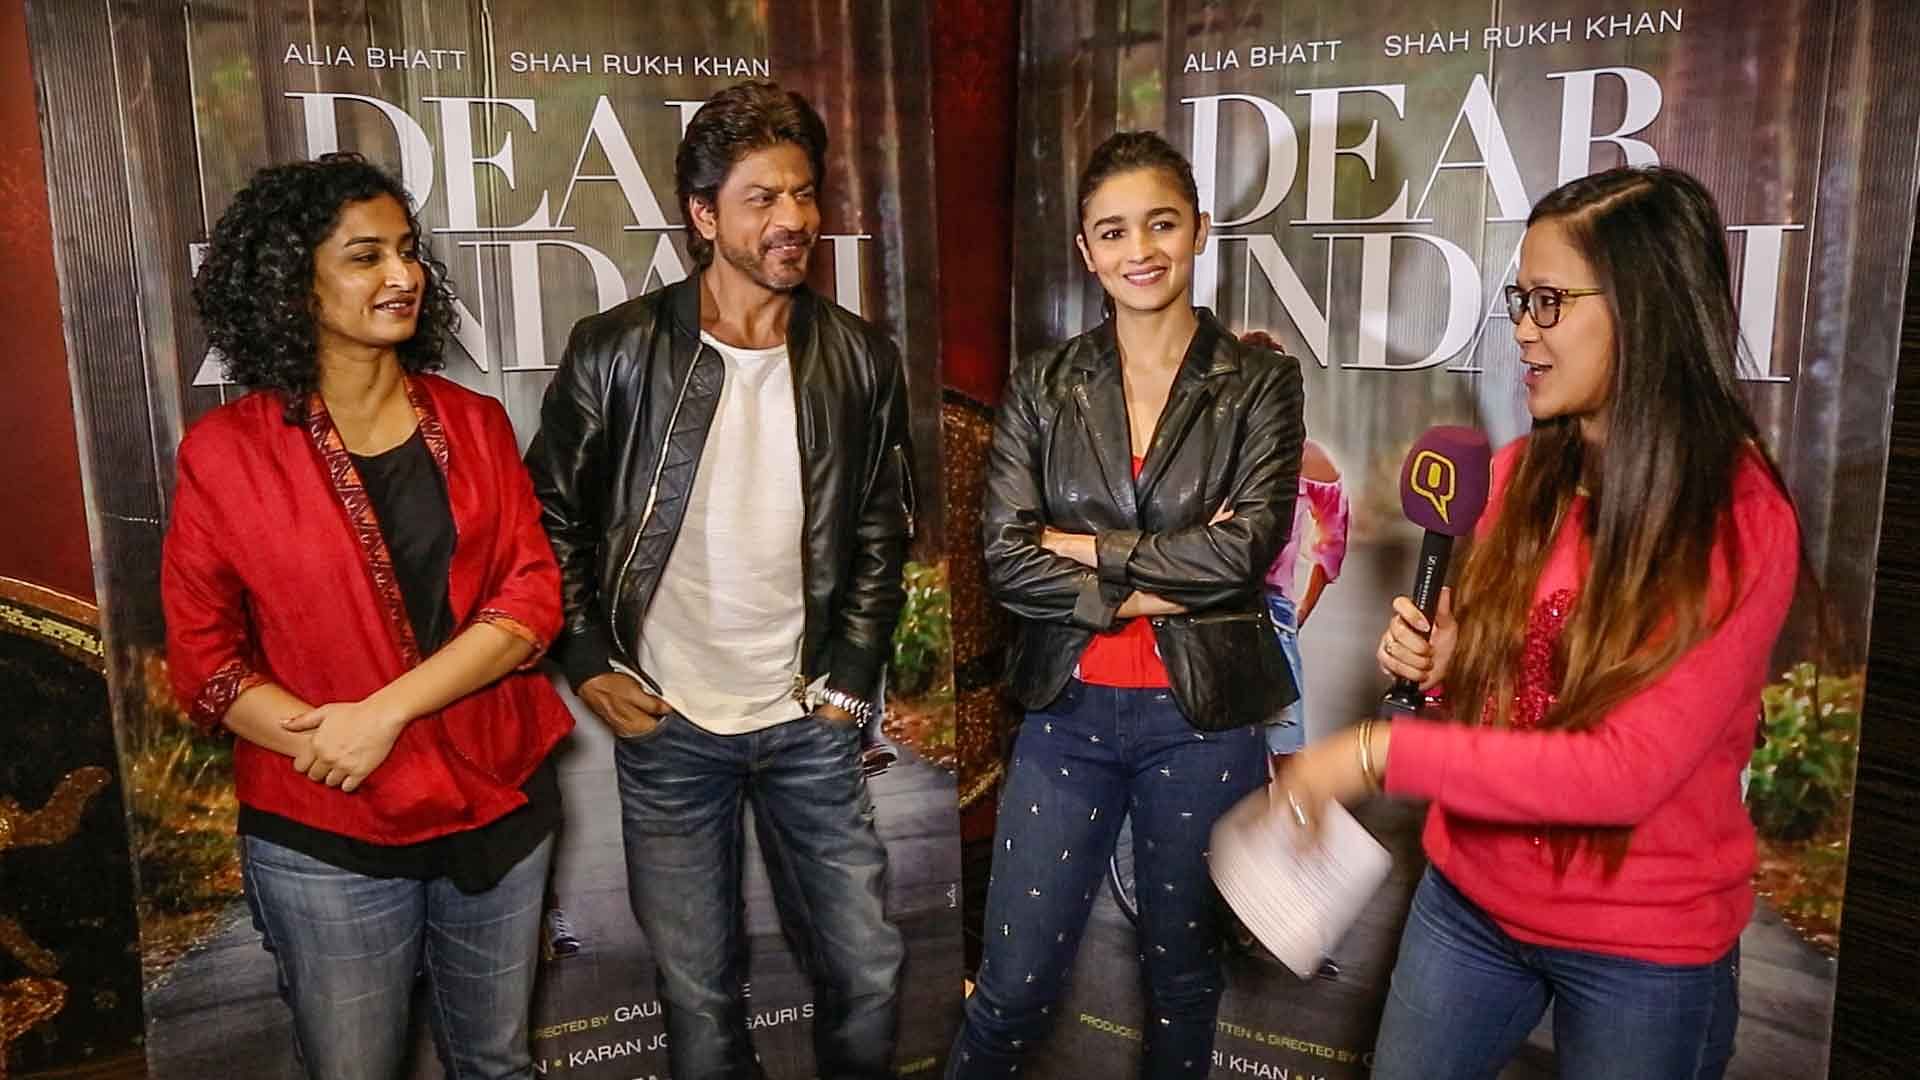 The director of Dear Zindagi with Alia Bhat and Shah Rukh Khan in an interview with The Quint.